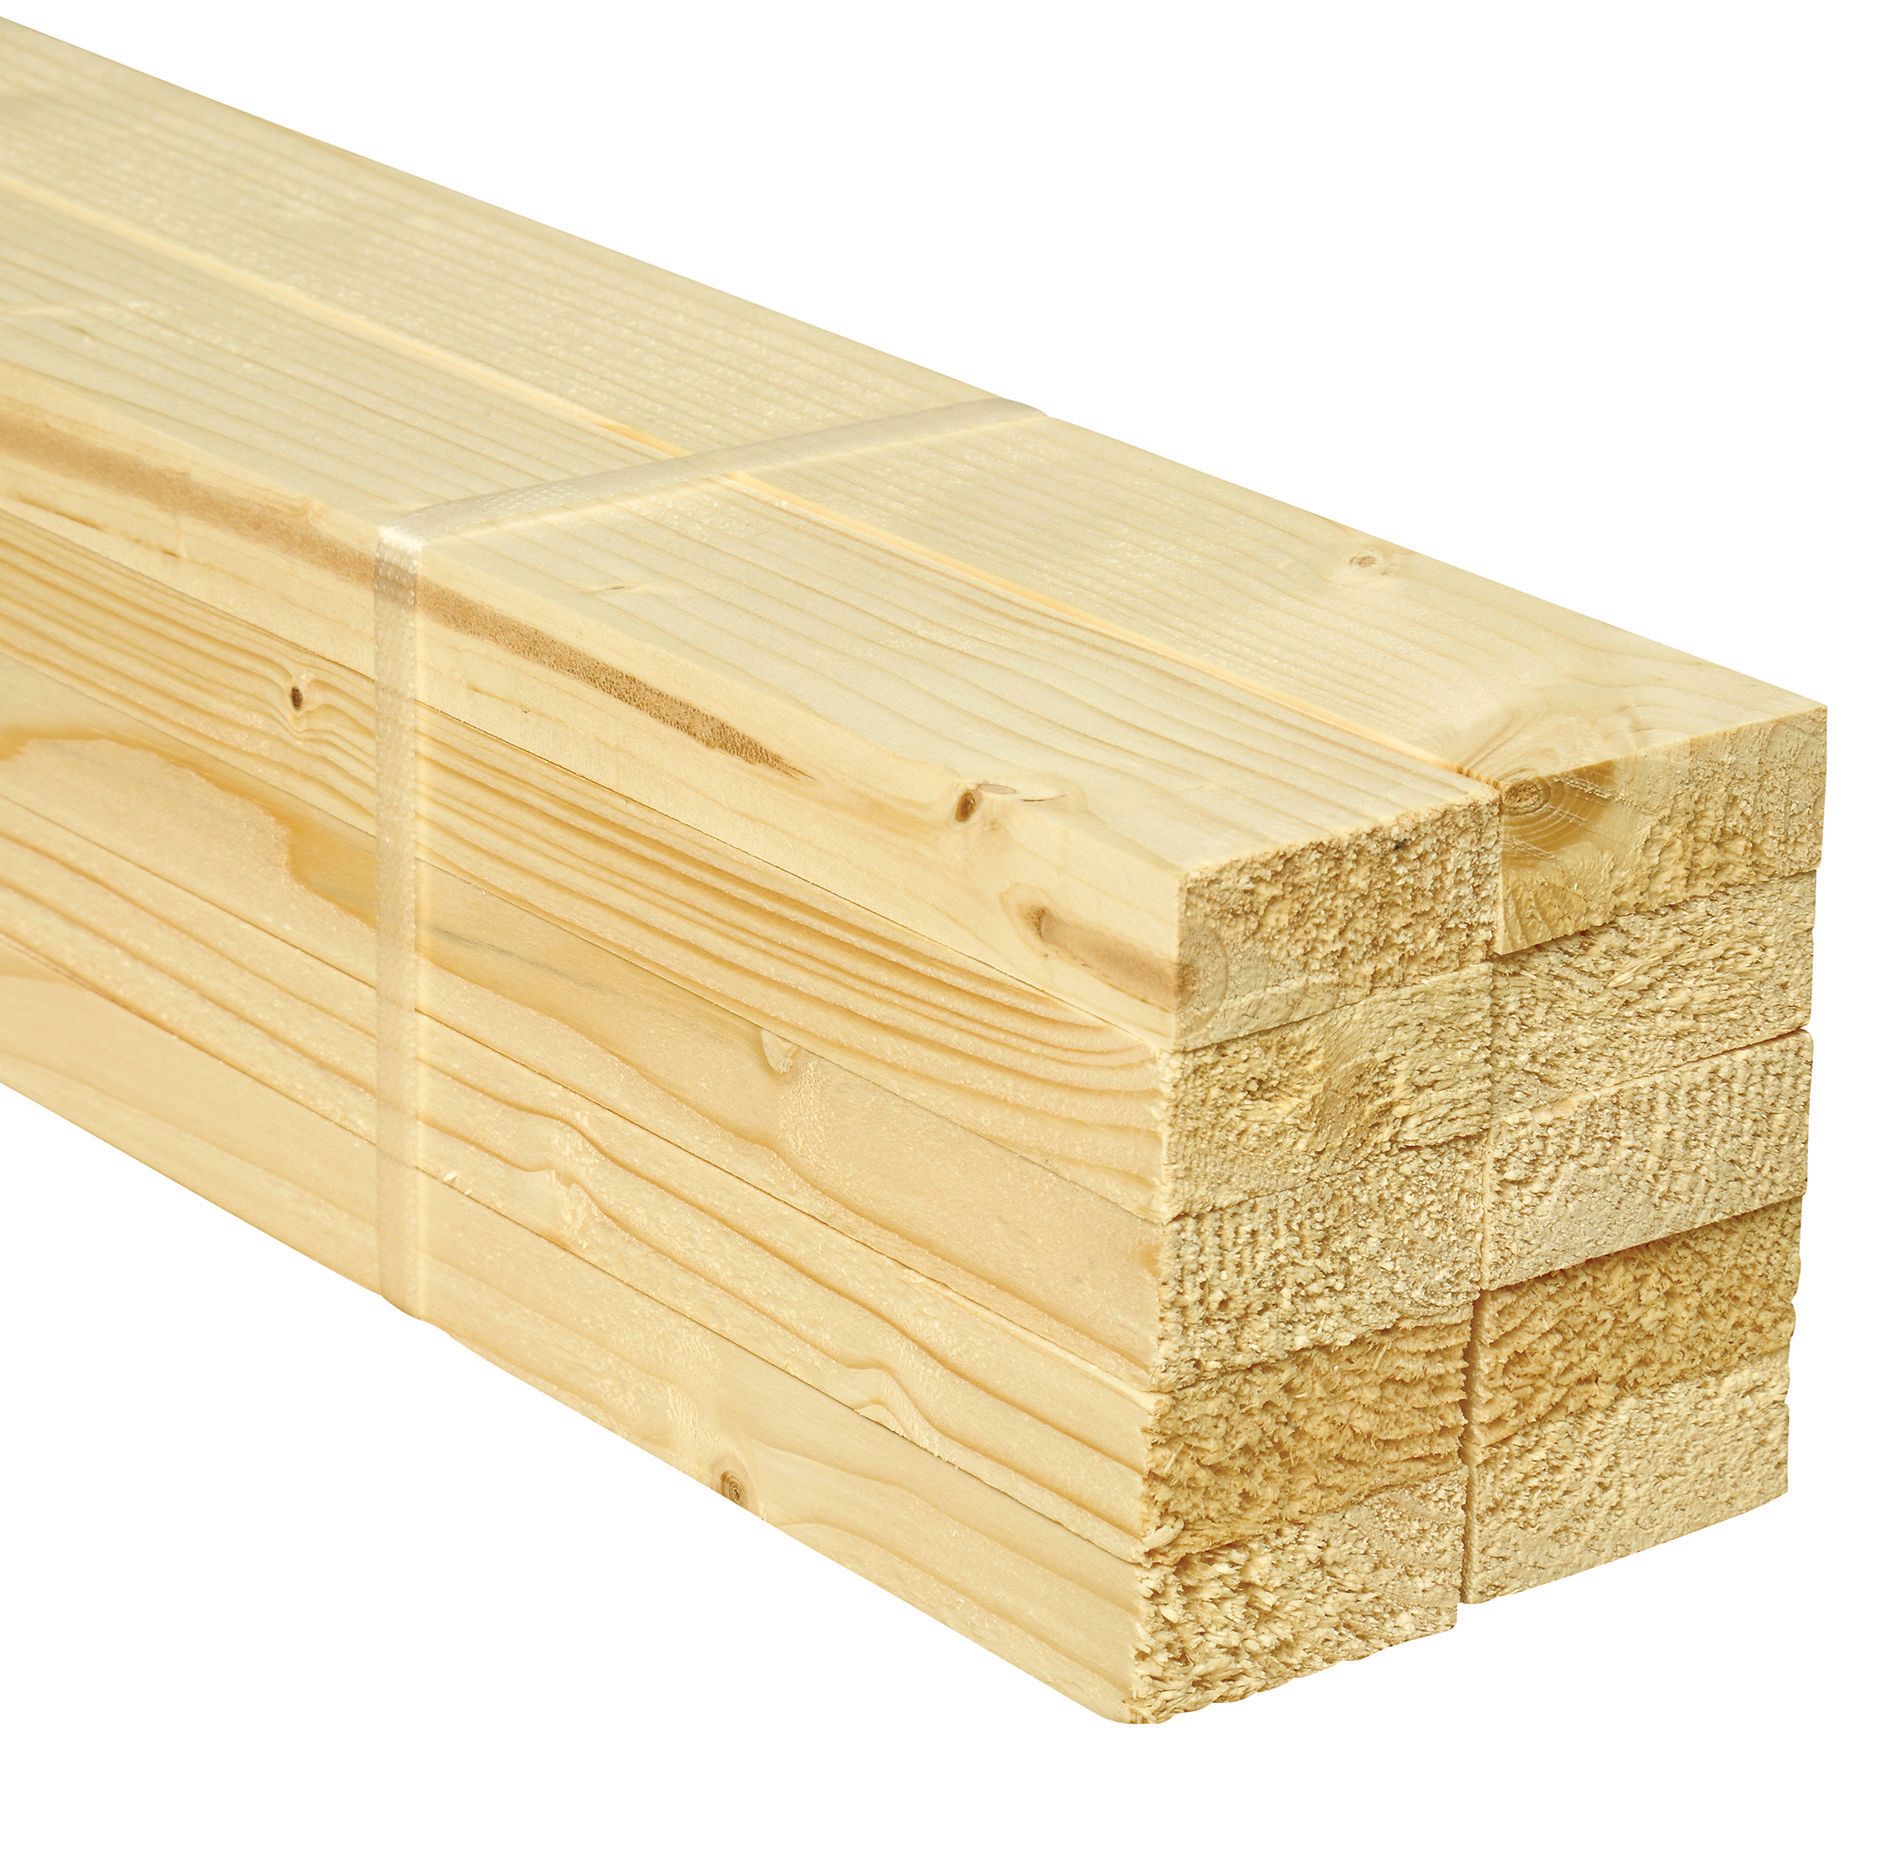 Image of Wickes Whitewood PSE Timber - 18 x 44 x 1800mm - Pack of 10